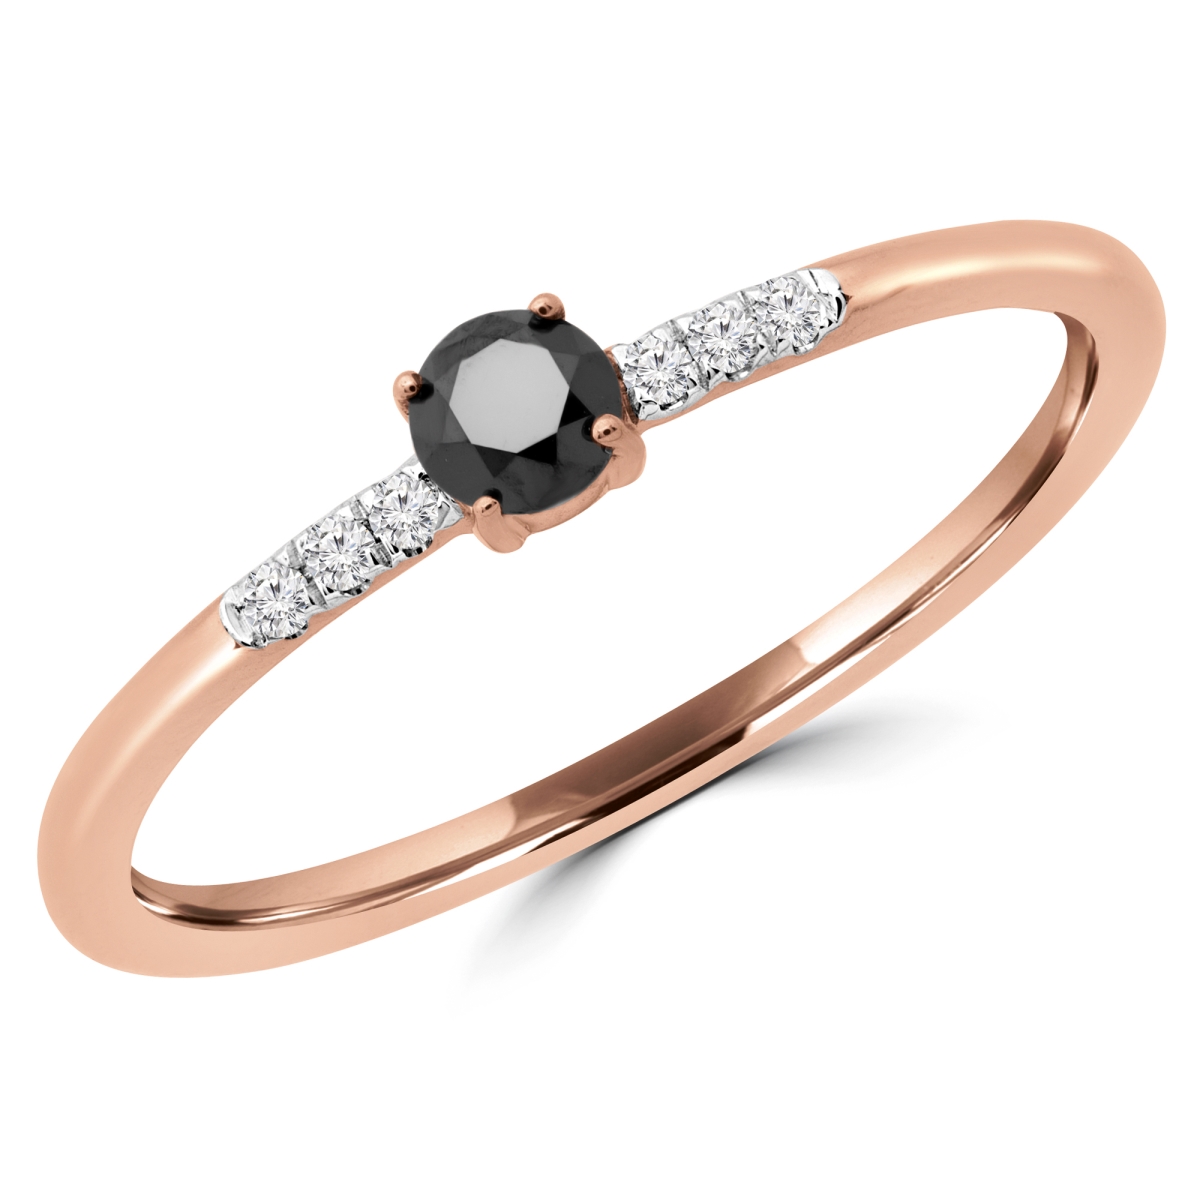 Picture of Majesty Diamonds MDR190079-3 0.16 CTW Round Black Diamond Bezel Set Cocktail Ring in 14K Rose Gold - Size 3